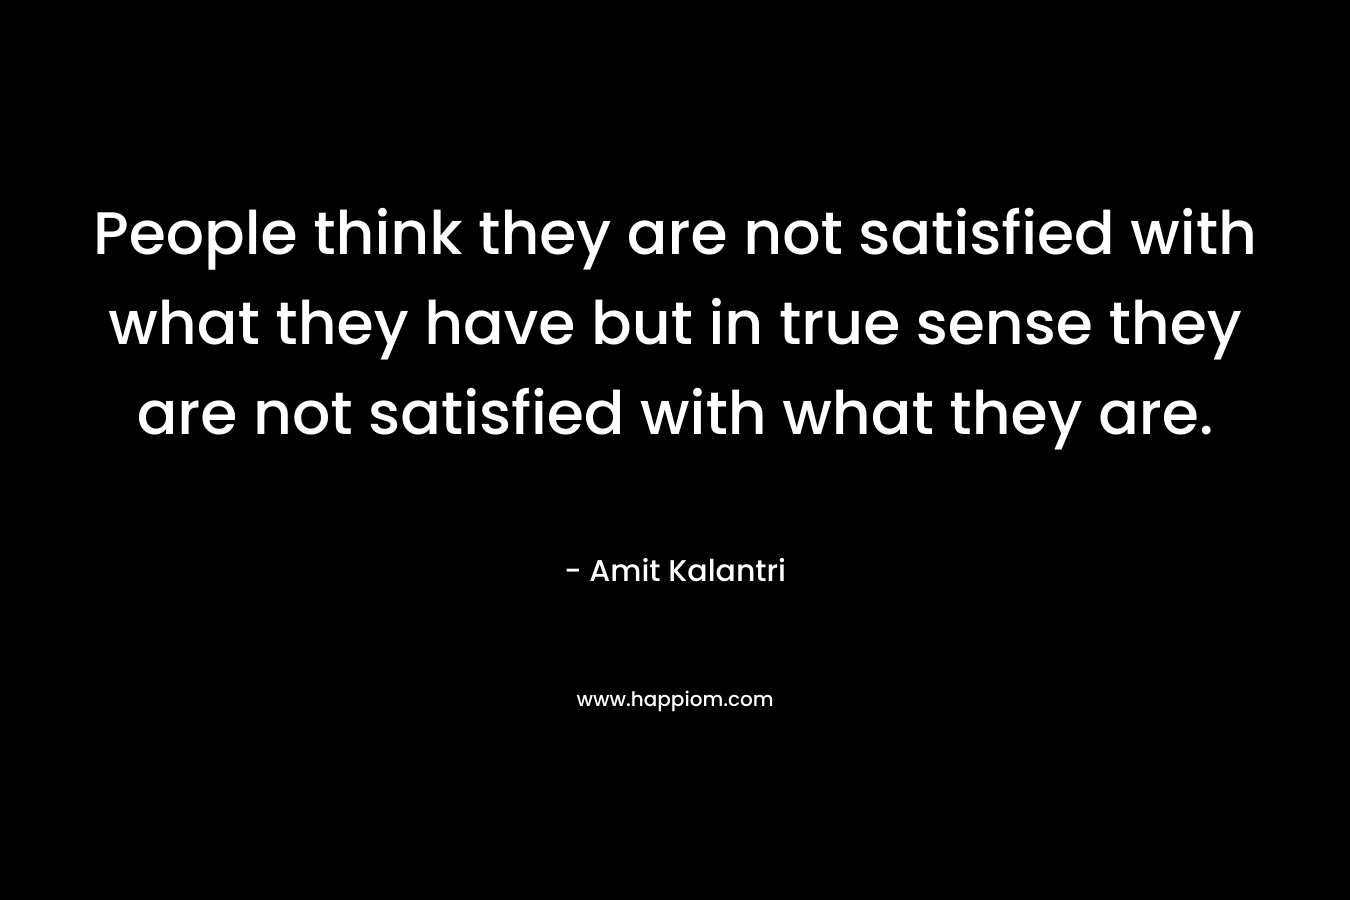 People think they are not satisfied with what they have but in true sense they are not satisfied with what they are.